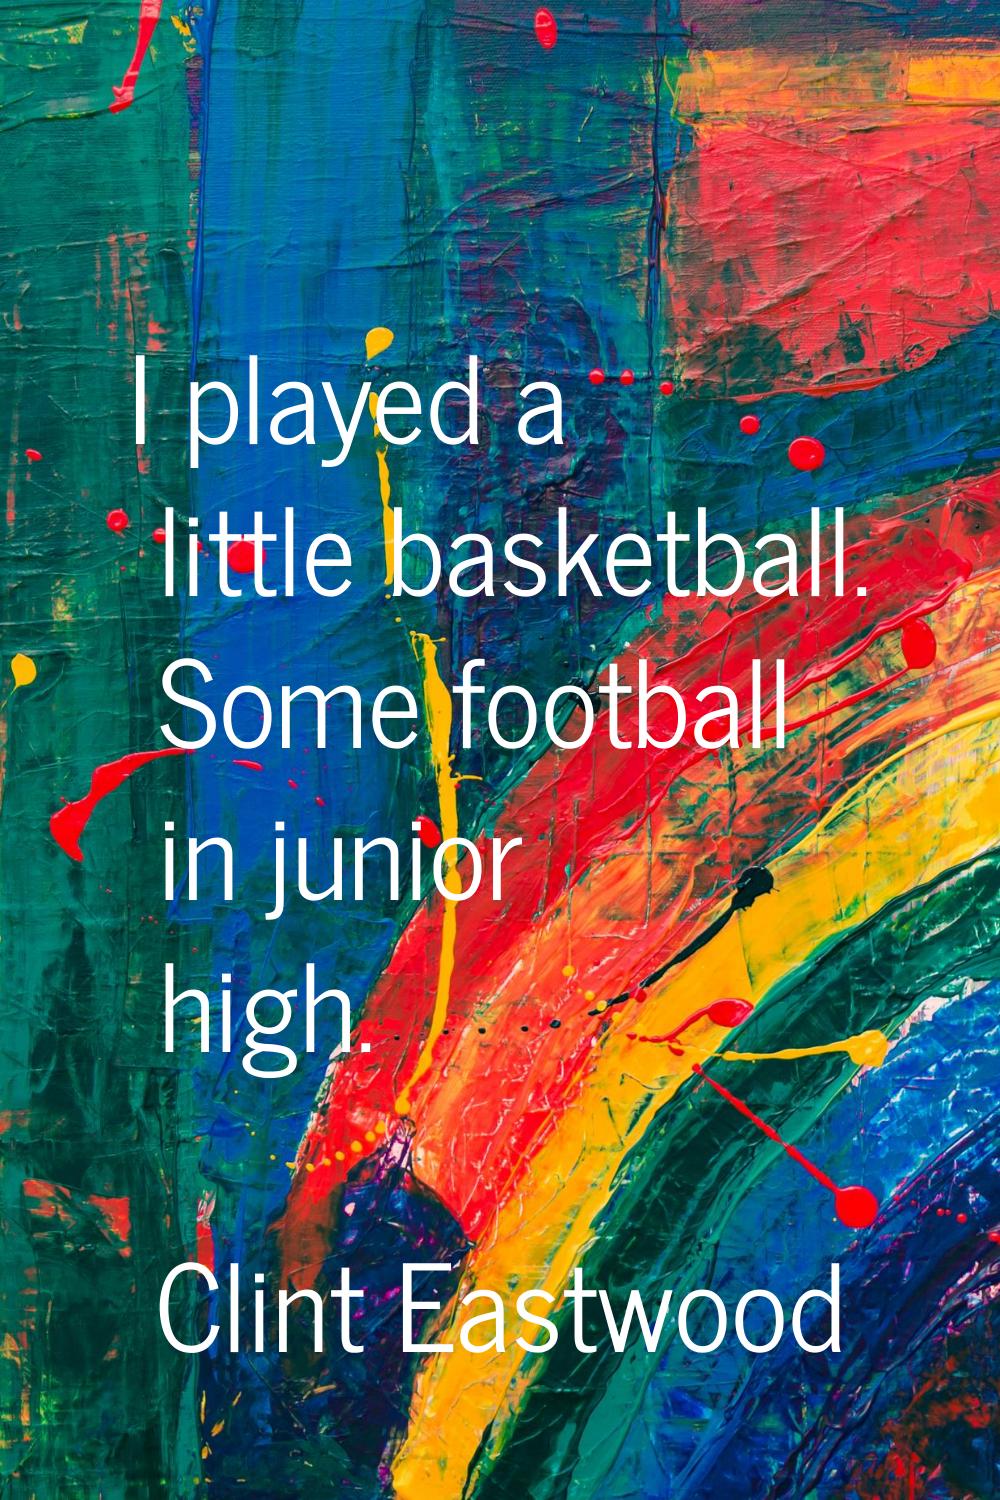 I played a little basketball. Some football in junior high.